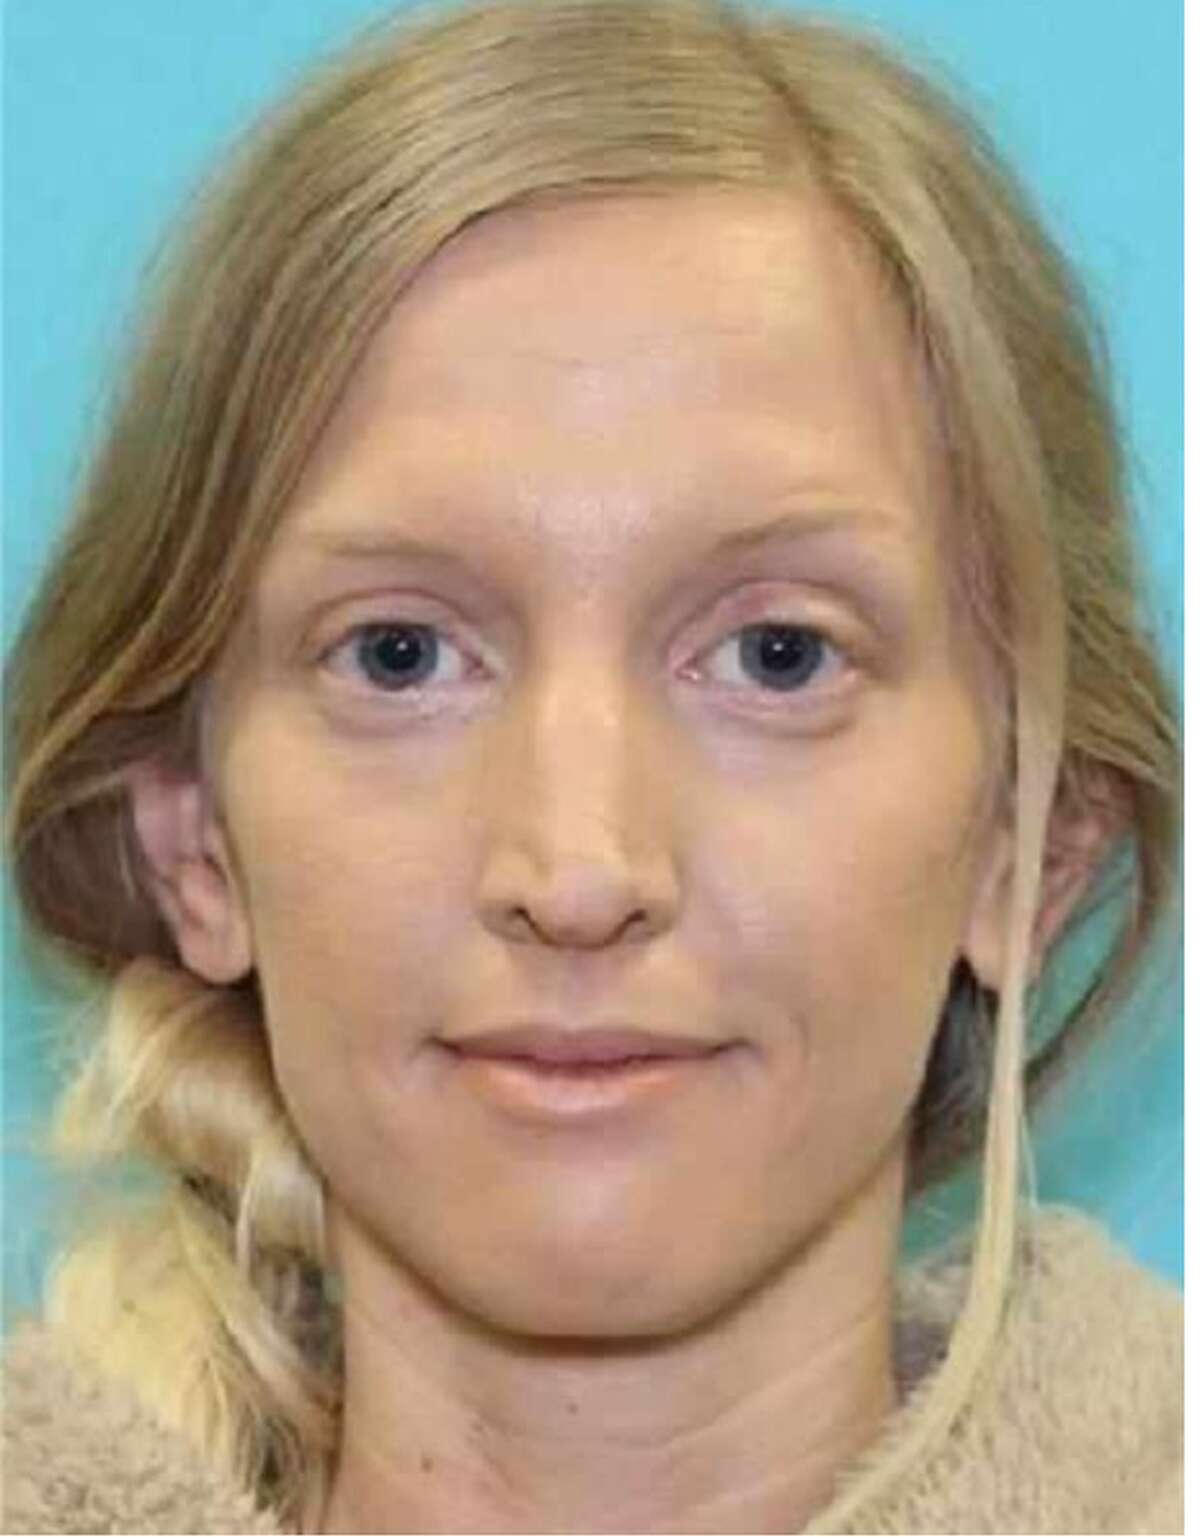 The Odessa Police Department is searching for 35-year-old Brittany Sawyer who was last seen on April 30 in Odessa. 